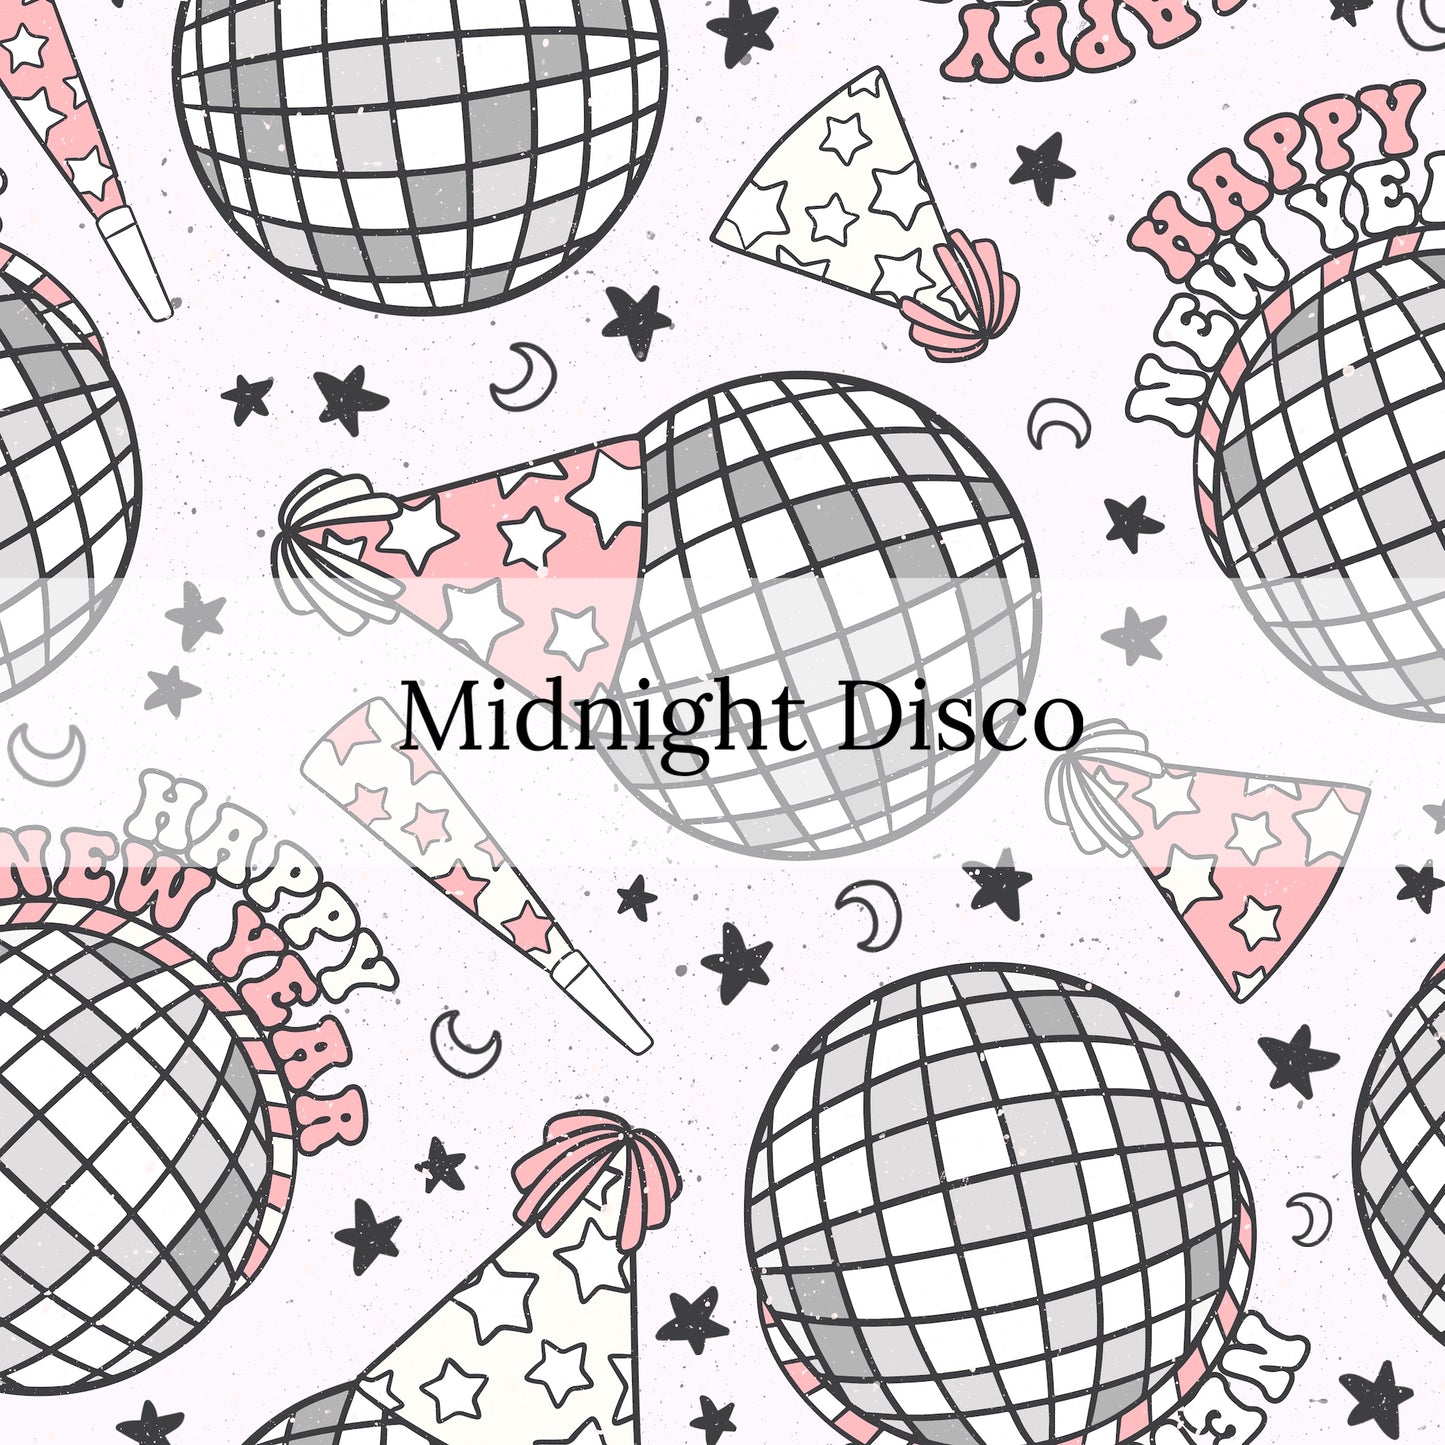 New years disco ball with partyhat illustration